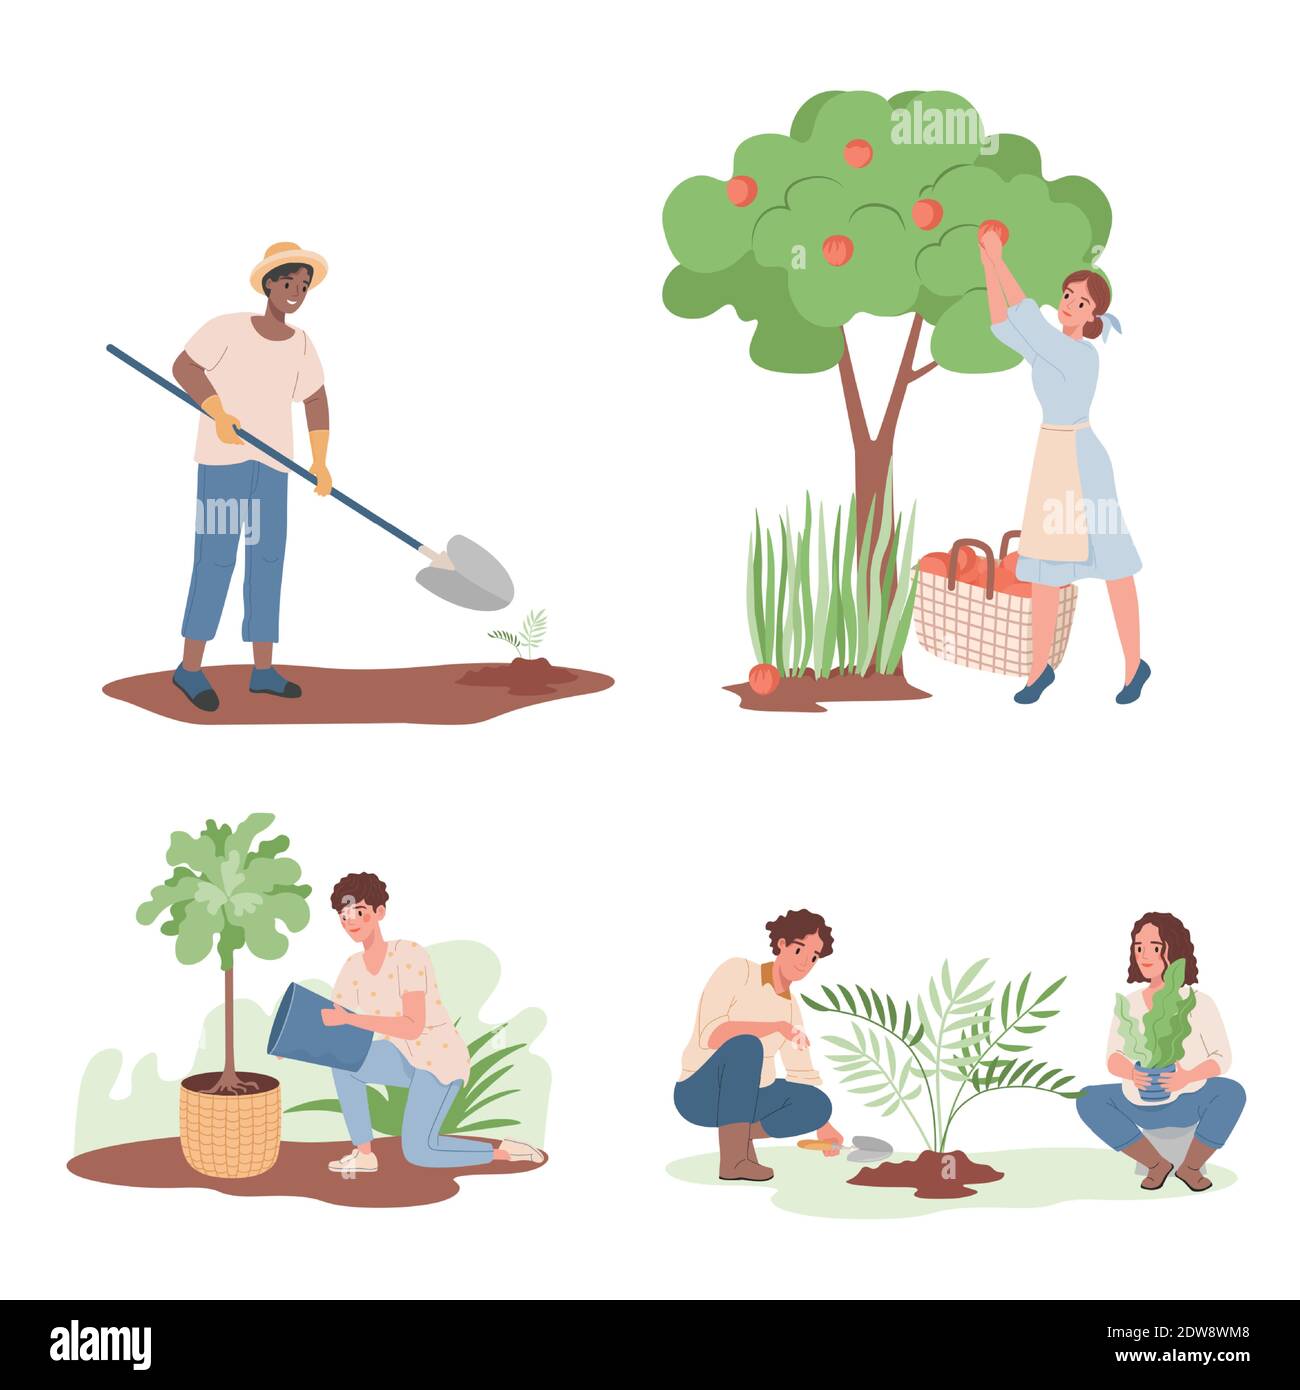 Gardening, agriculture gardener hobby vector flat illustration. Group of happy smiling people working in garden, watering and growing plants, picking apple harvest, digging plants. Stock Vector